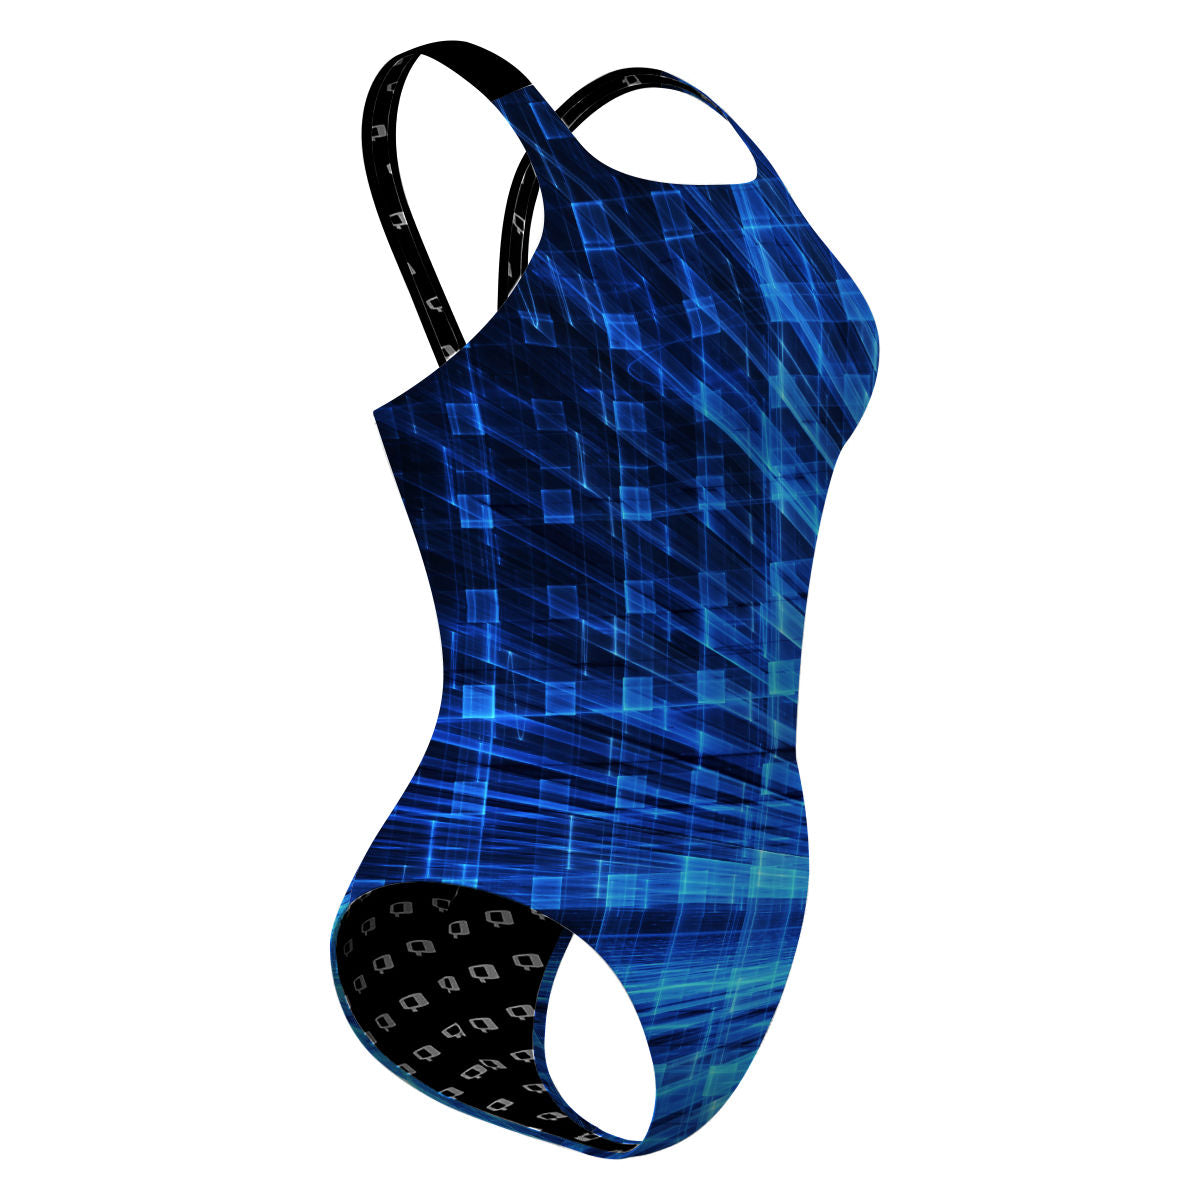 Hunterdon County YMCA Dolphins - Classic Strap Swimsuit